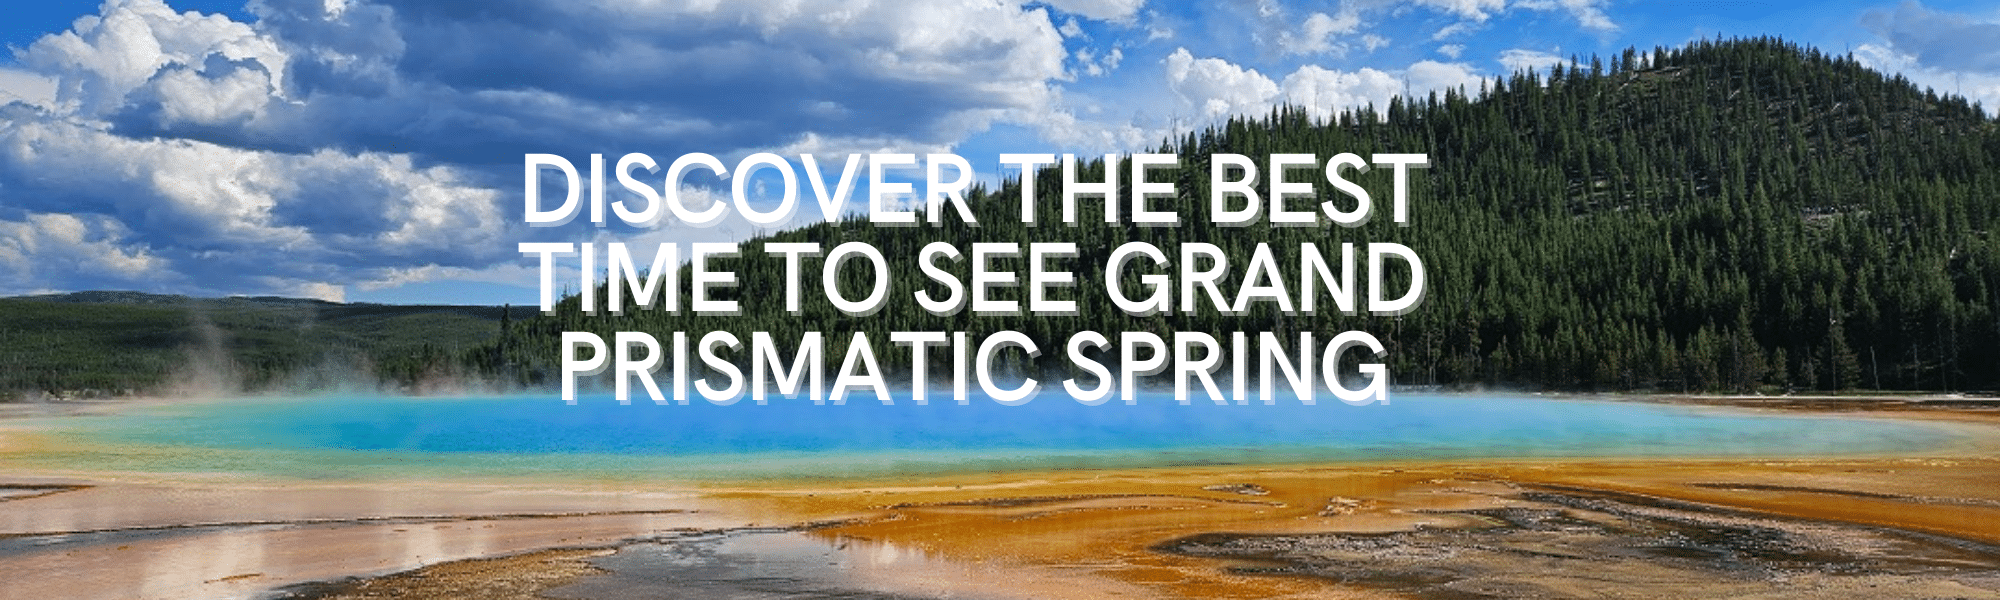 Best Time to See Grand Prismatic Spring